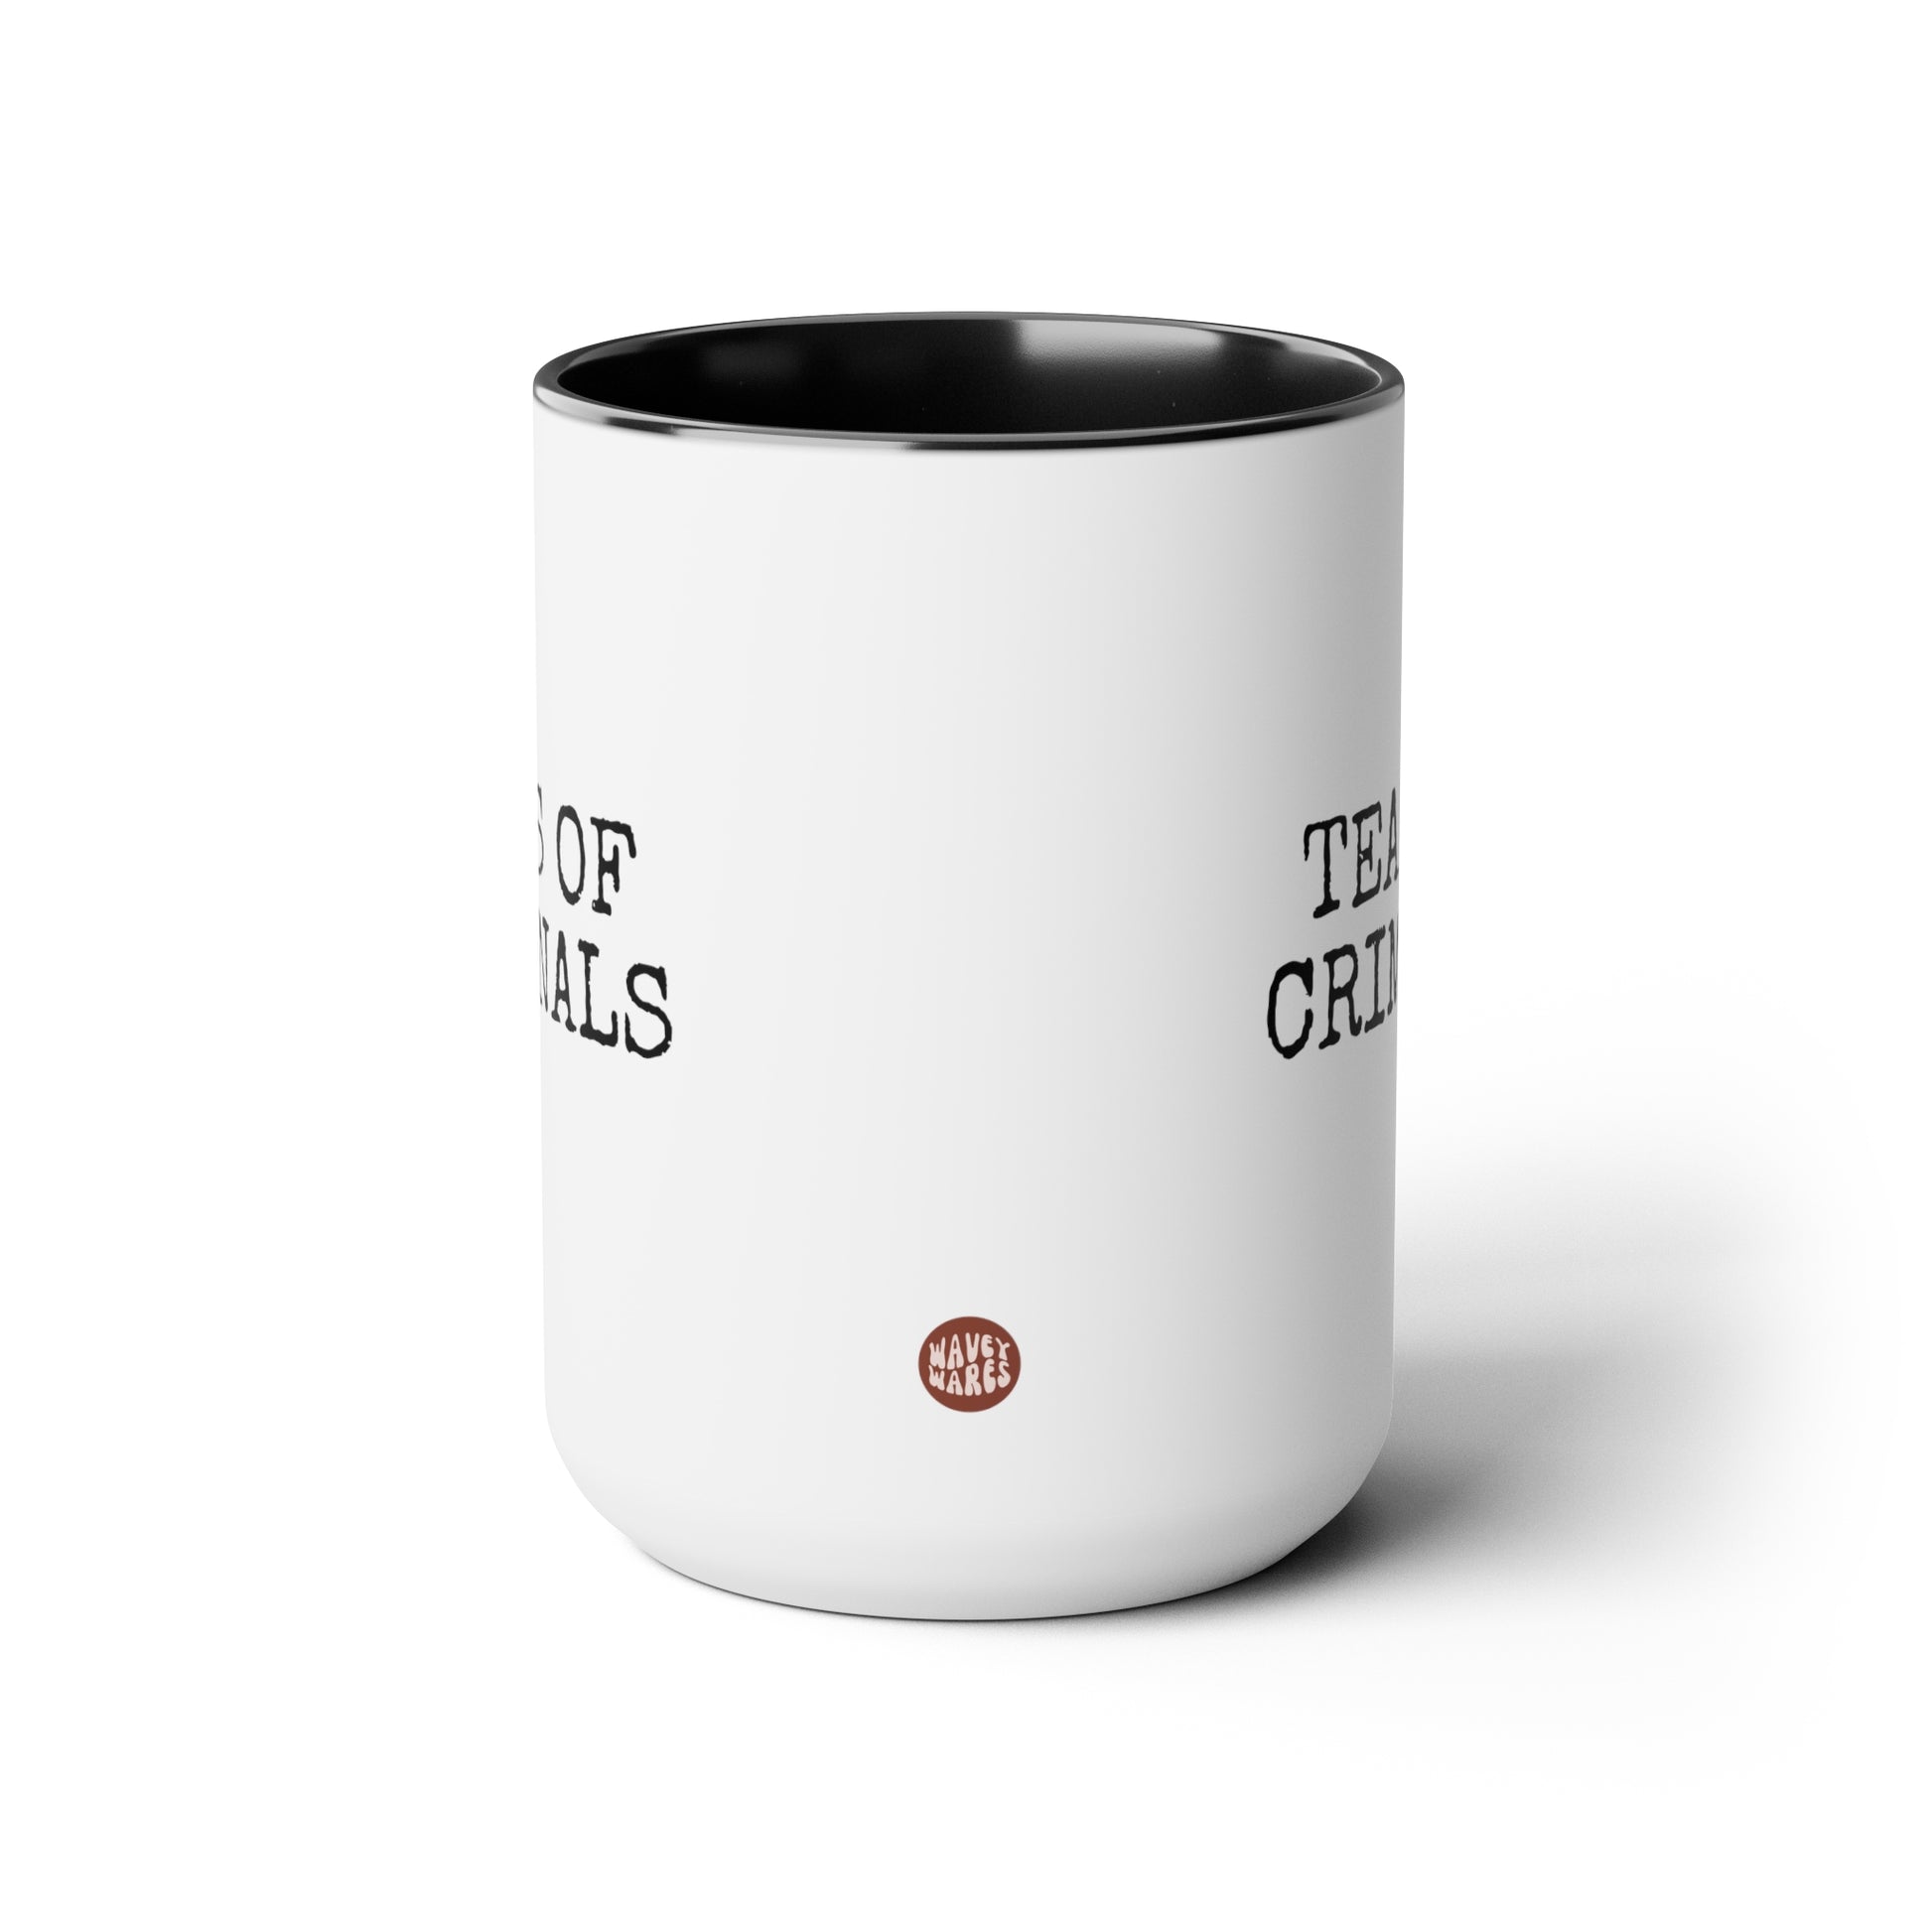 Tears of Criminals 15oz white with black accent funny large coffee mug gift for police officer cop graduation grad waveywares wavey wares wavywares wavy wares side